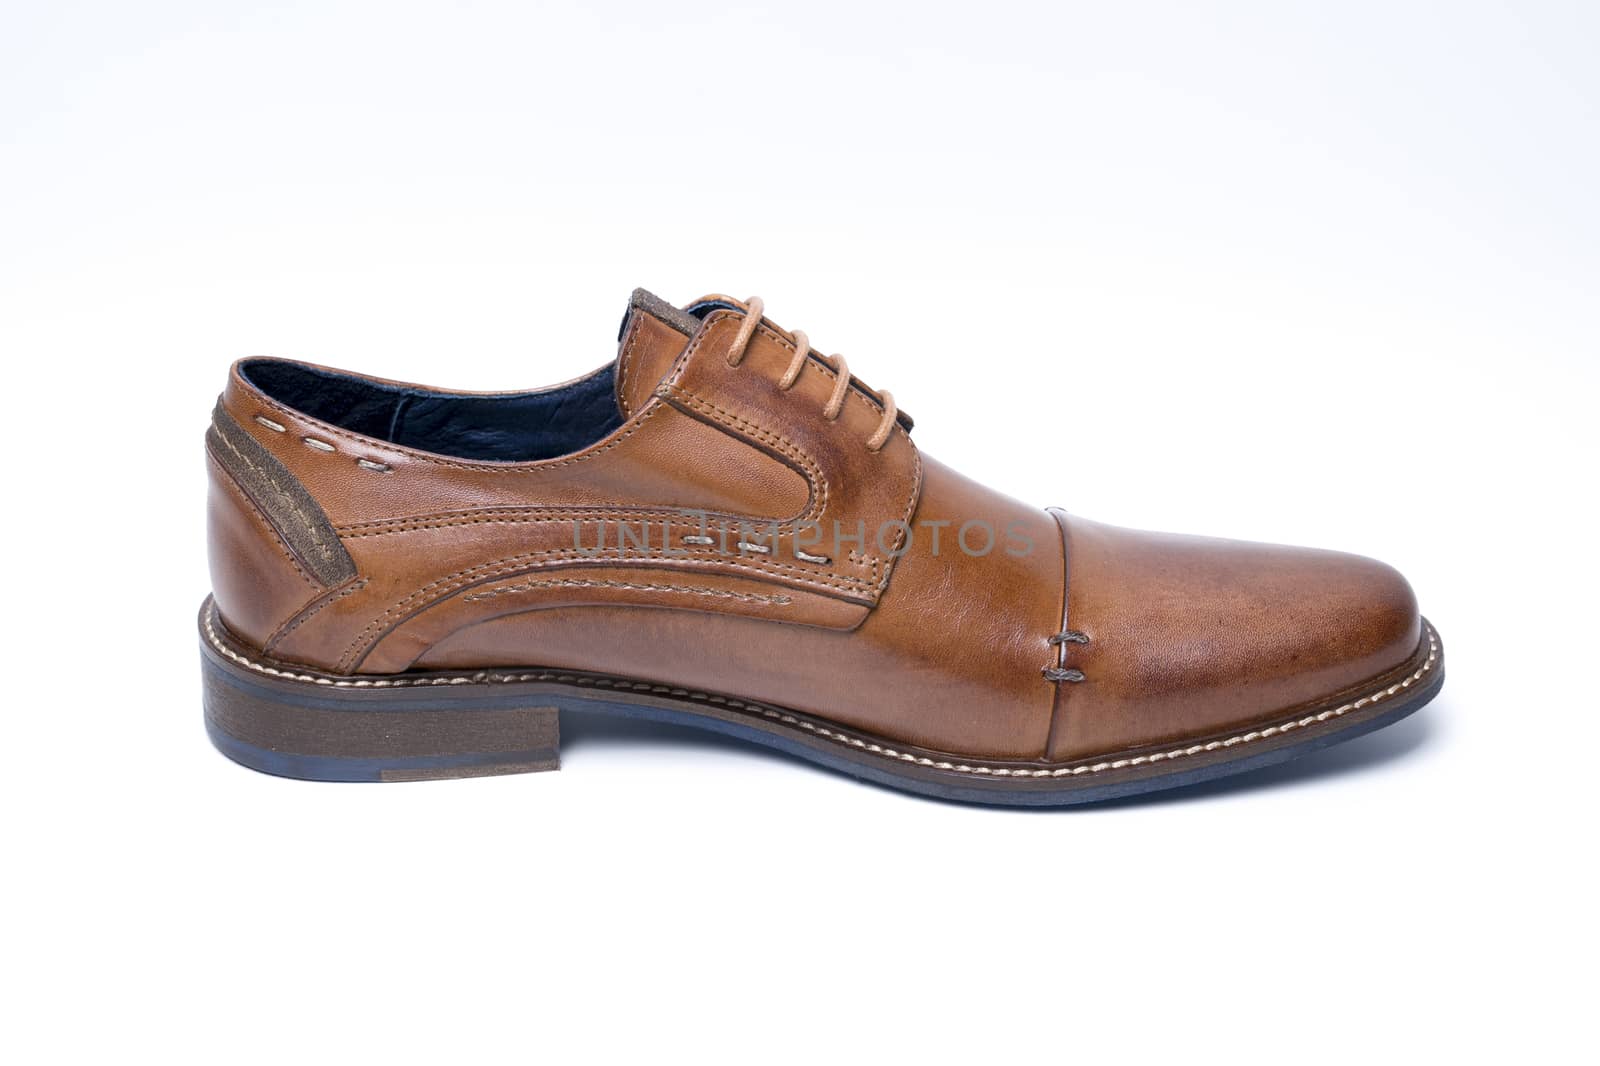 Male brown leather shoe on white background, isolated product, top view.